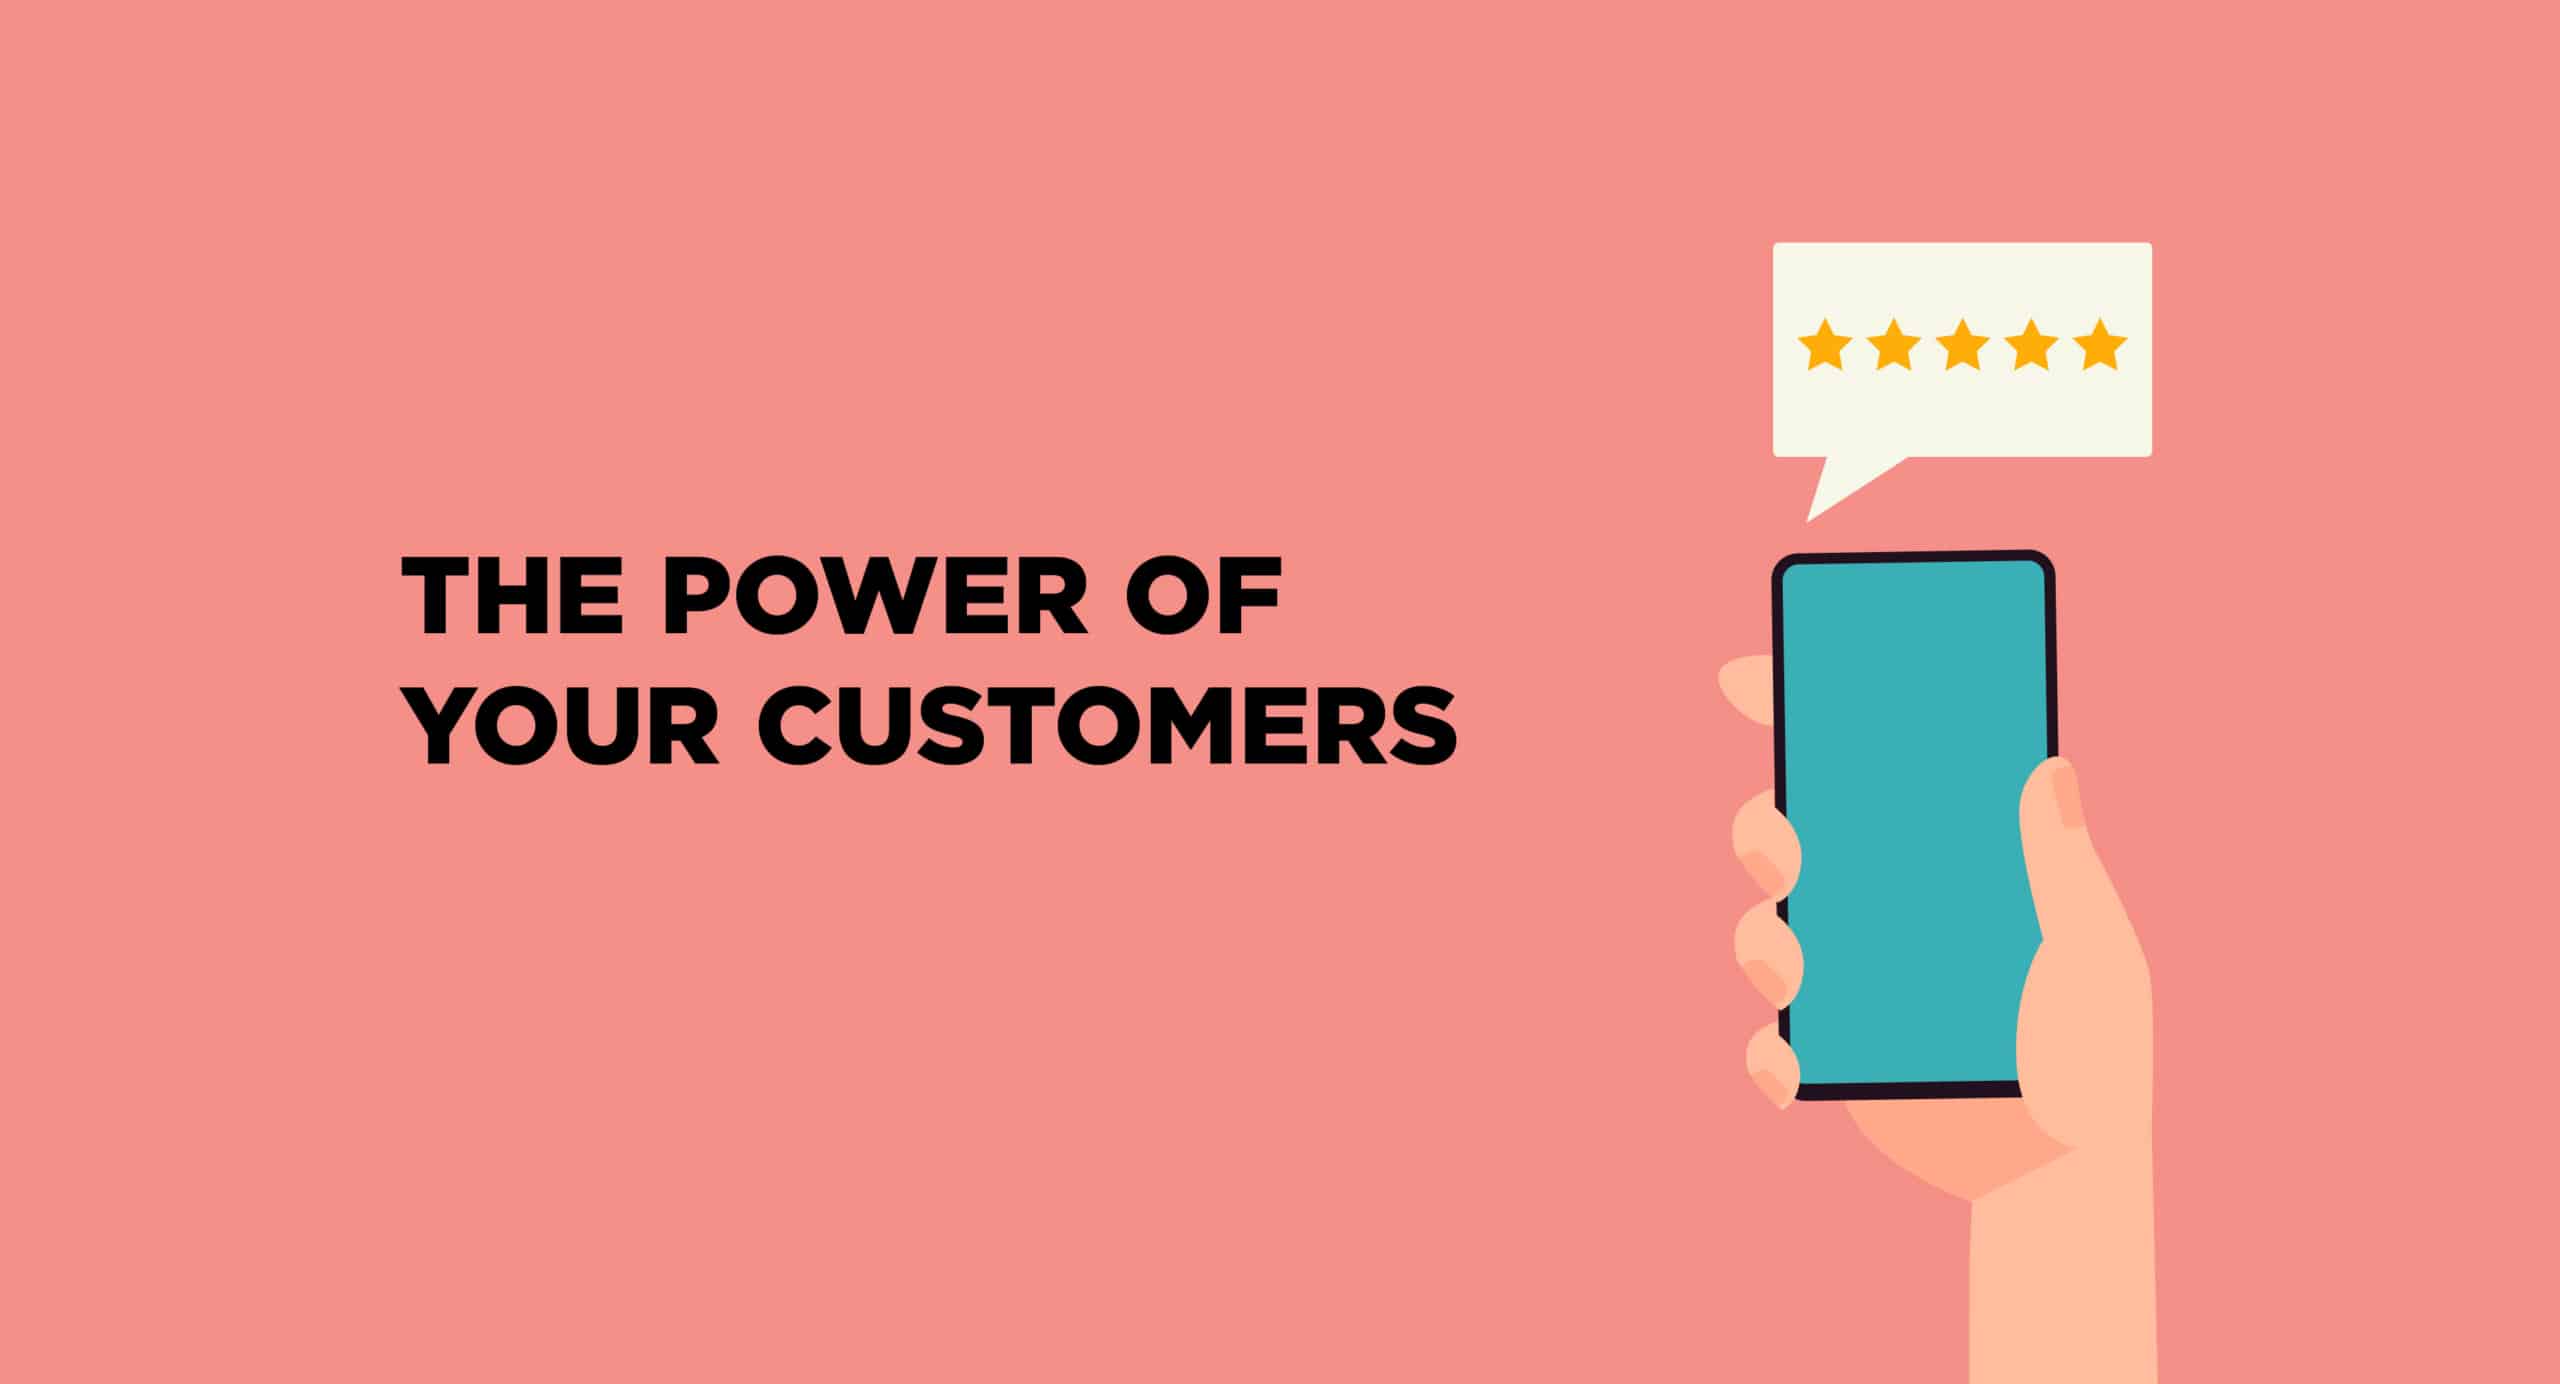 Online reviews are a powerful tool for brands